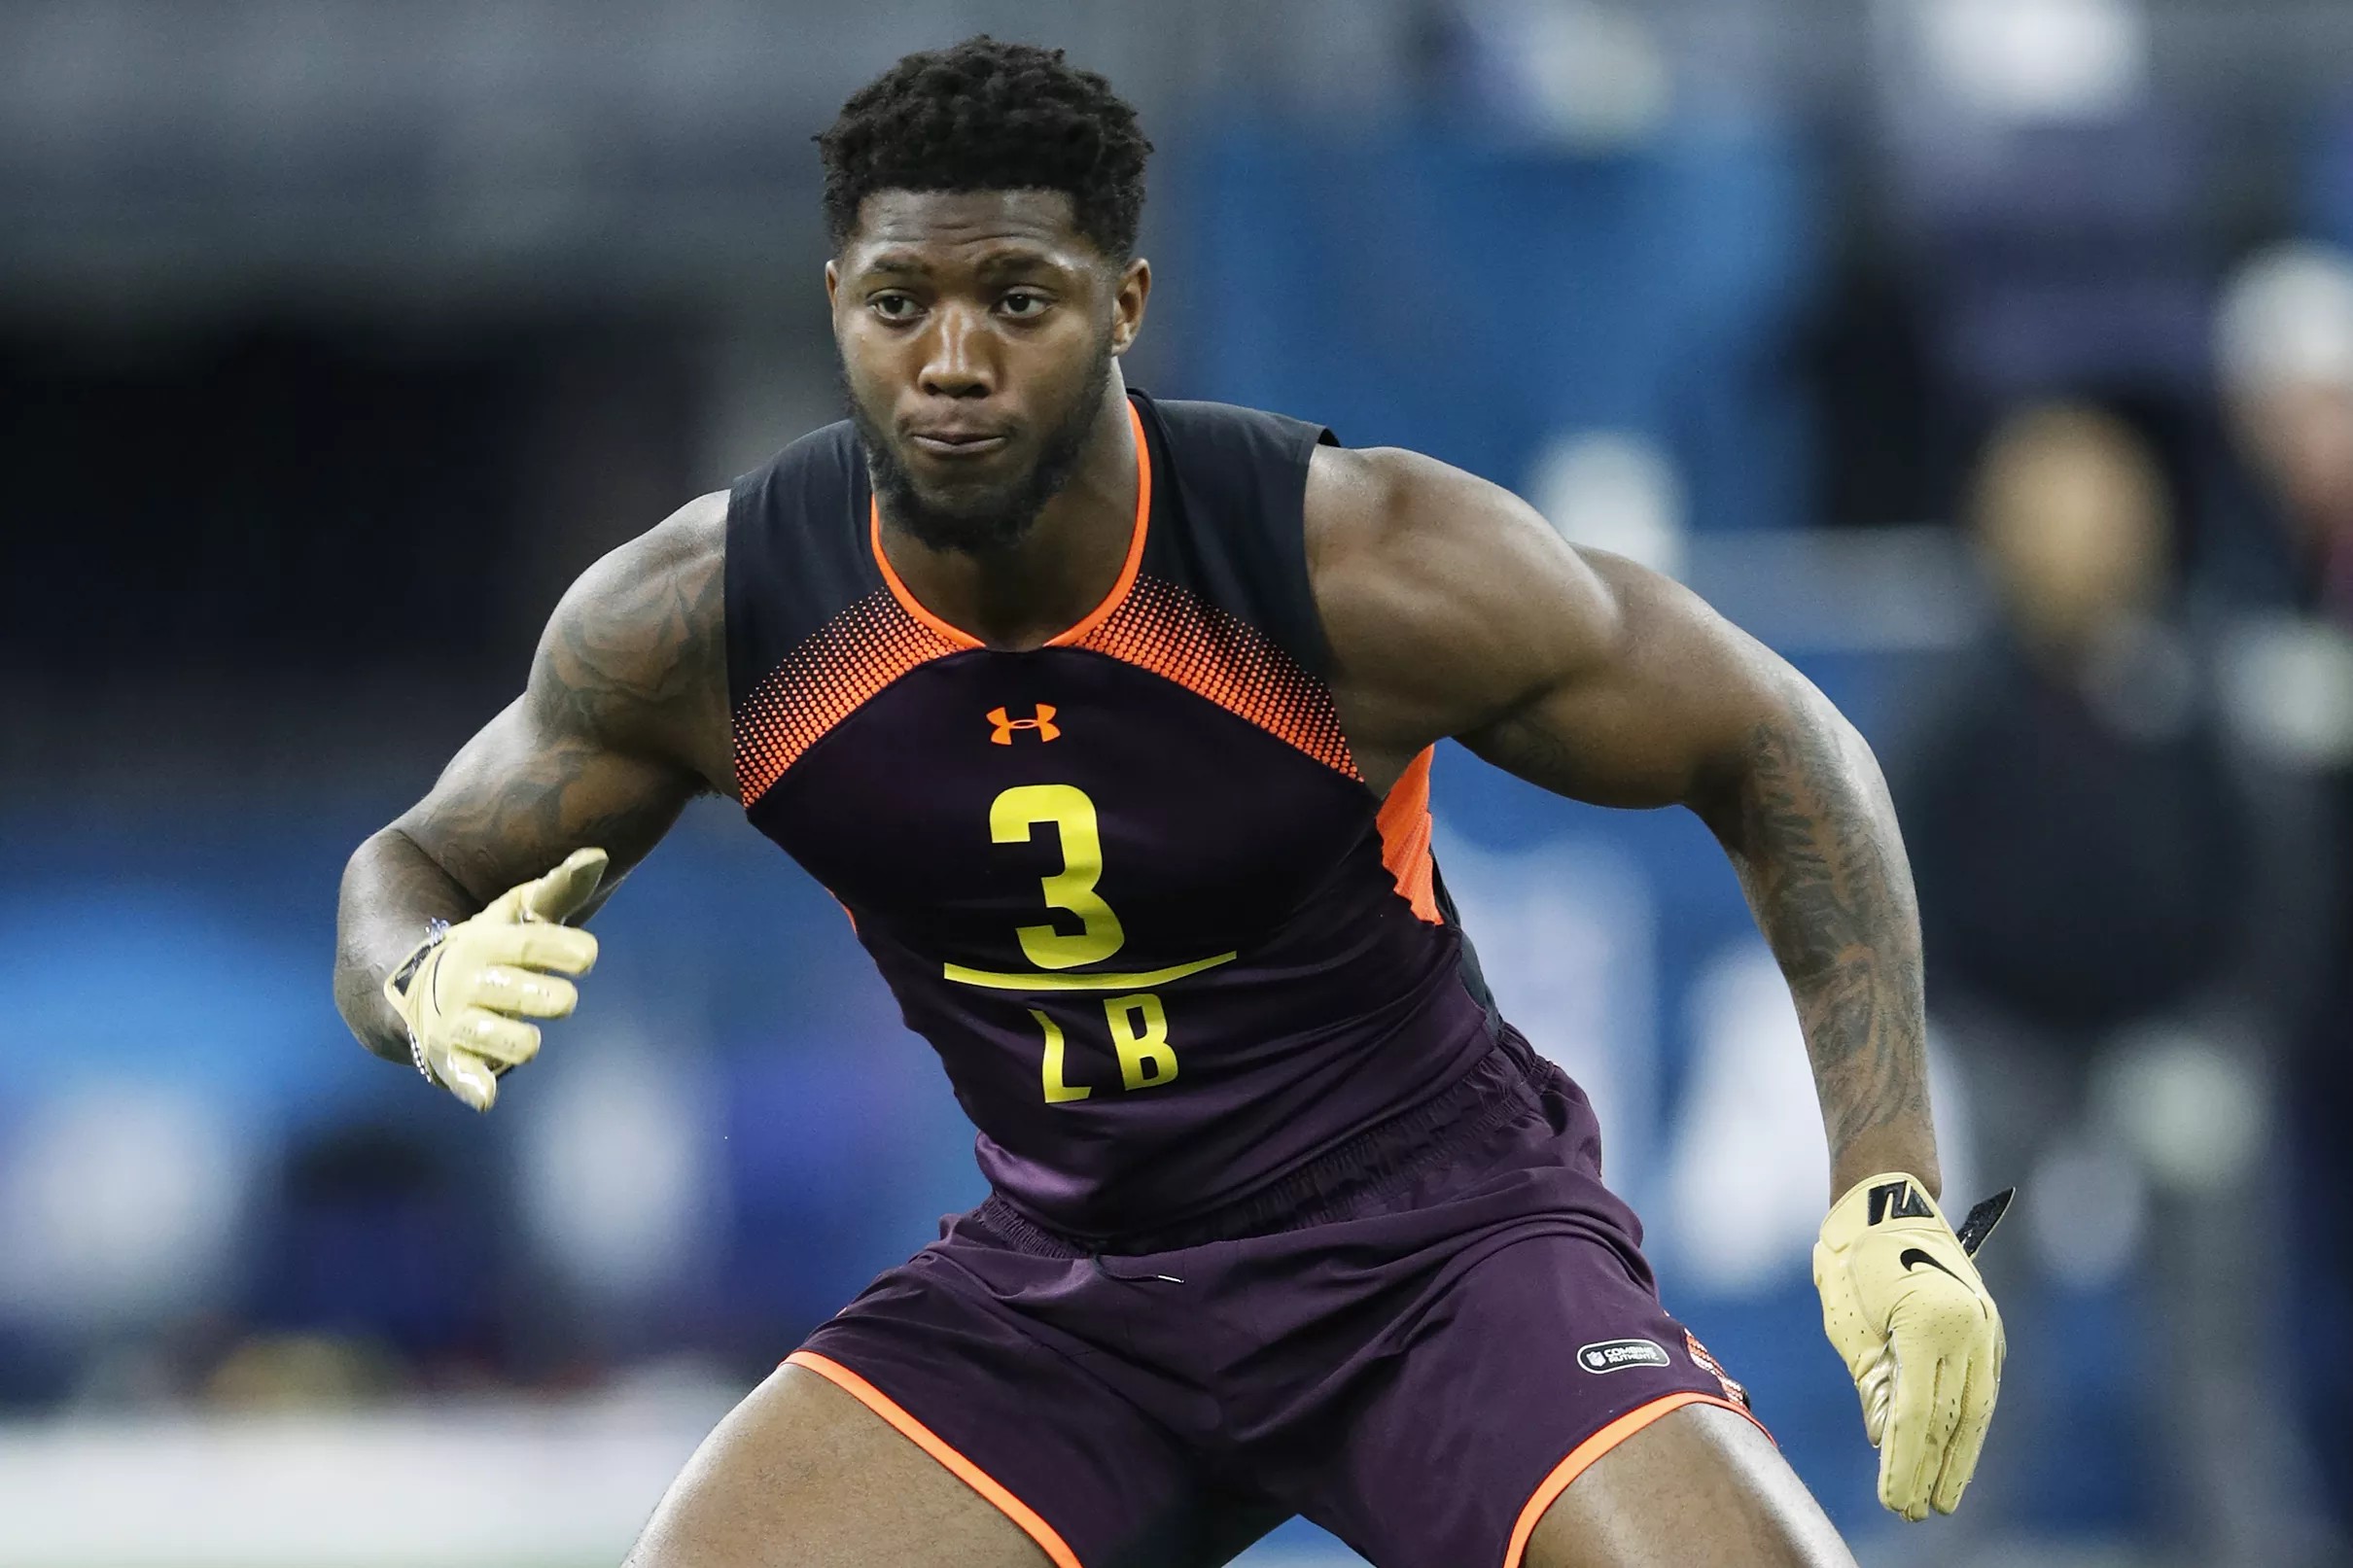 Kentucky Football players shine at the NFL combine